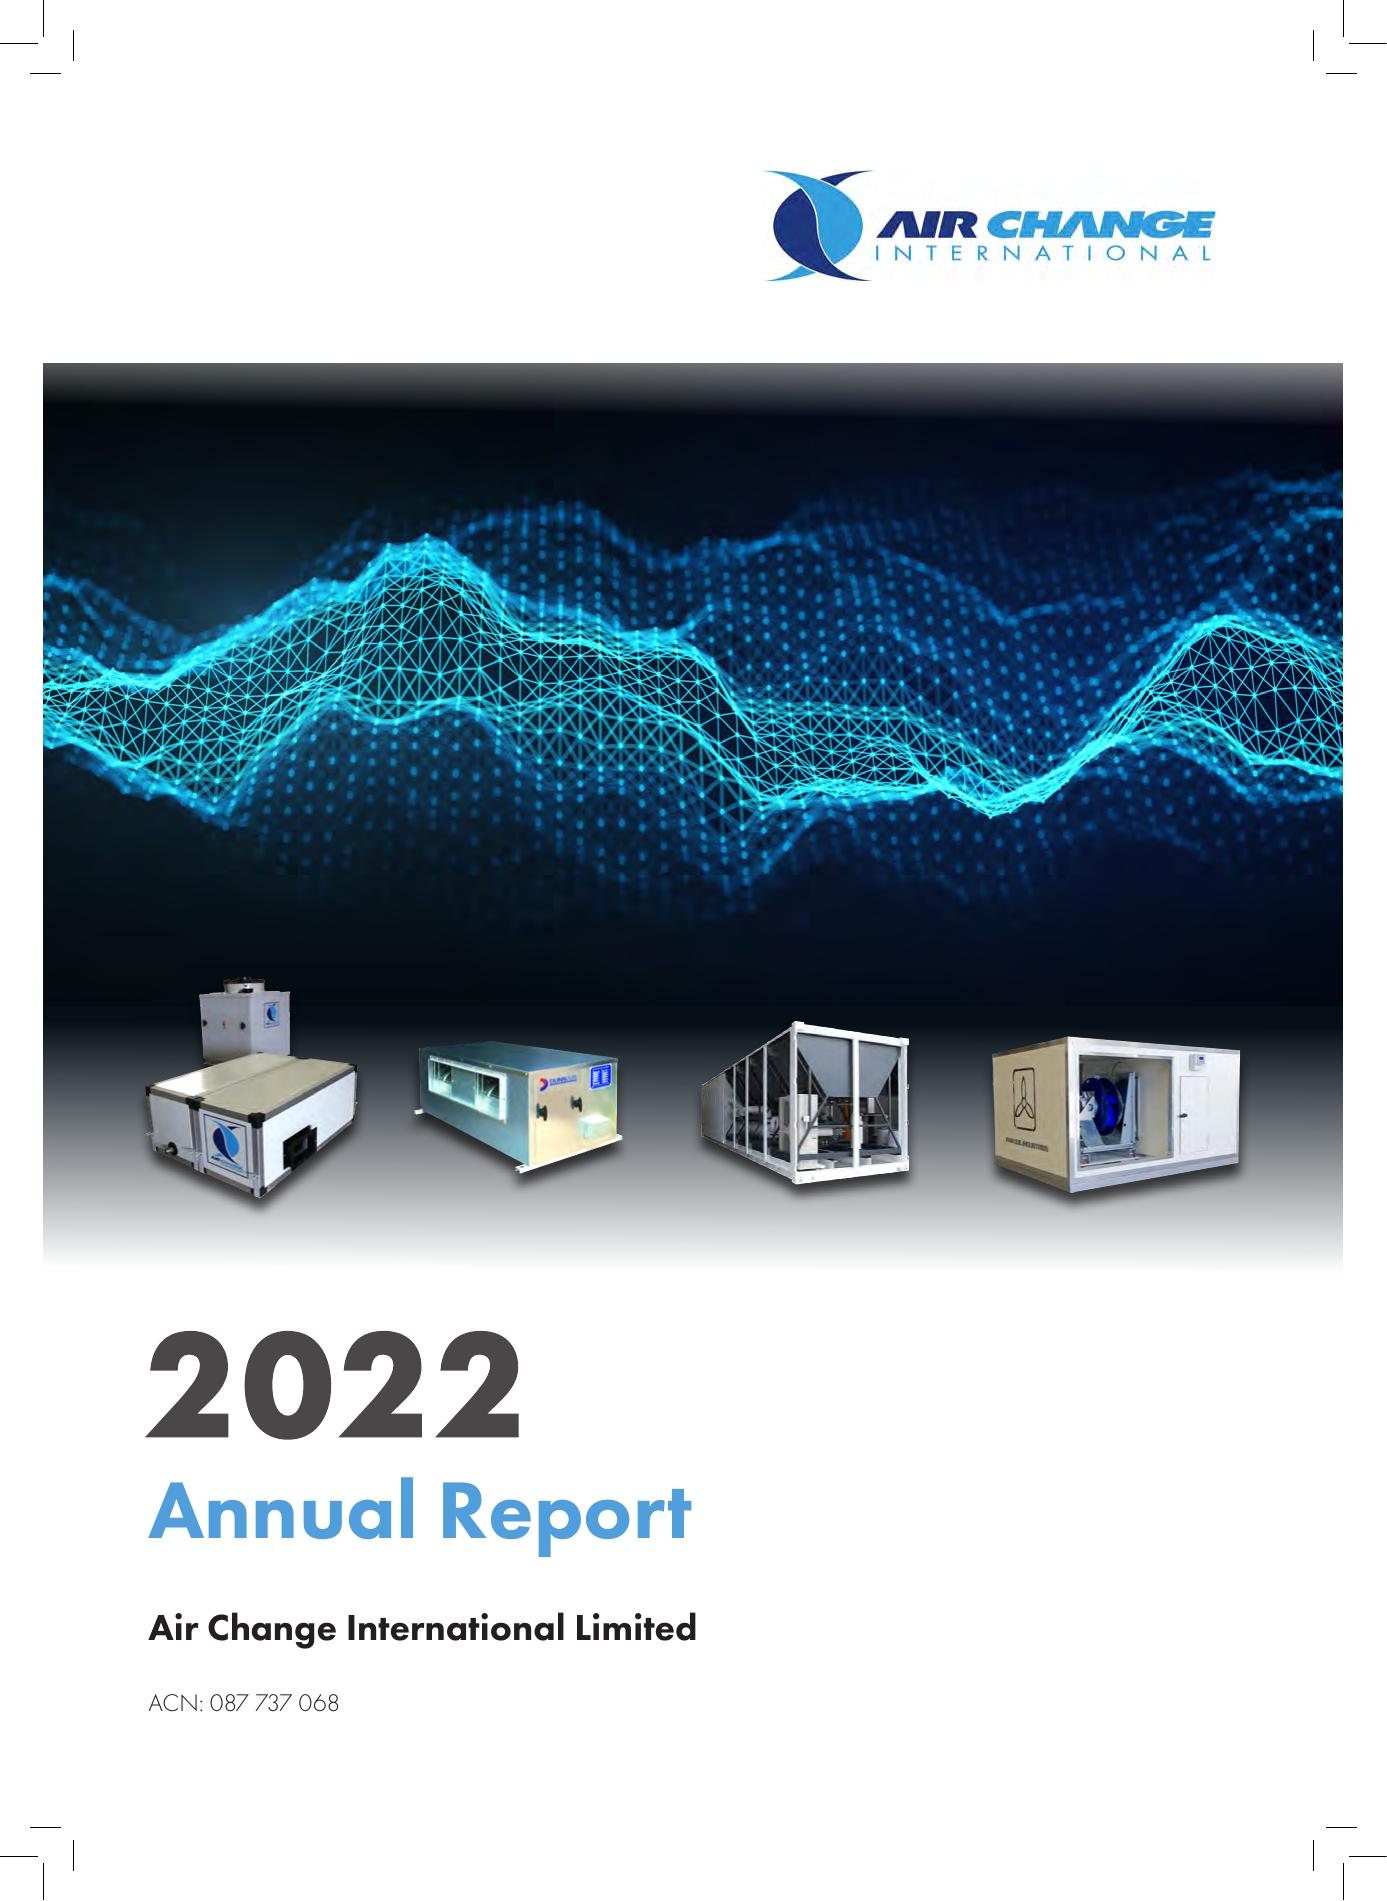 AIRCHANGE 2022 Annual Report